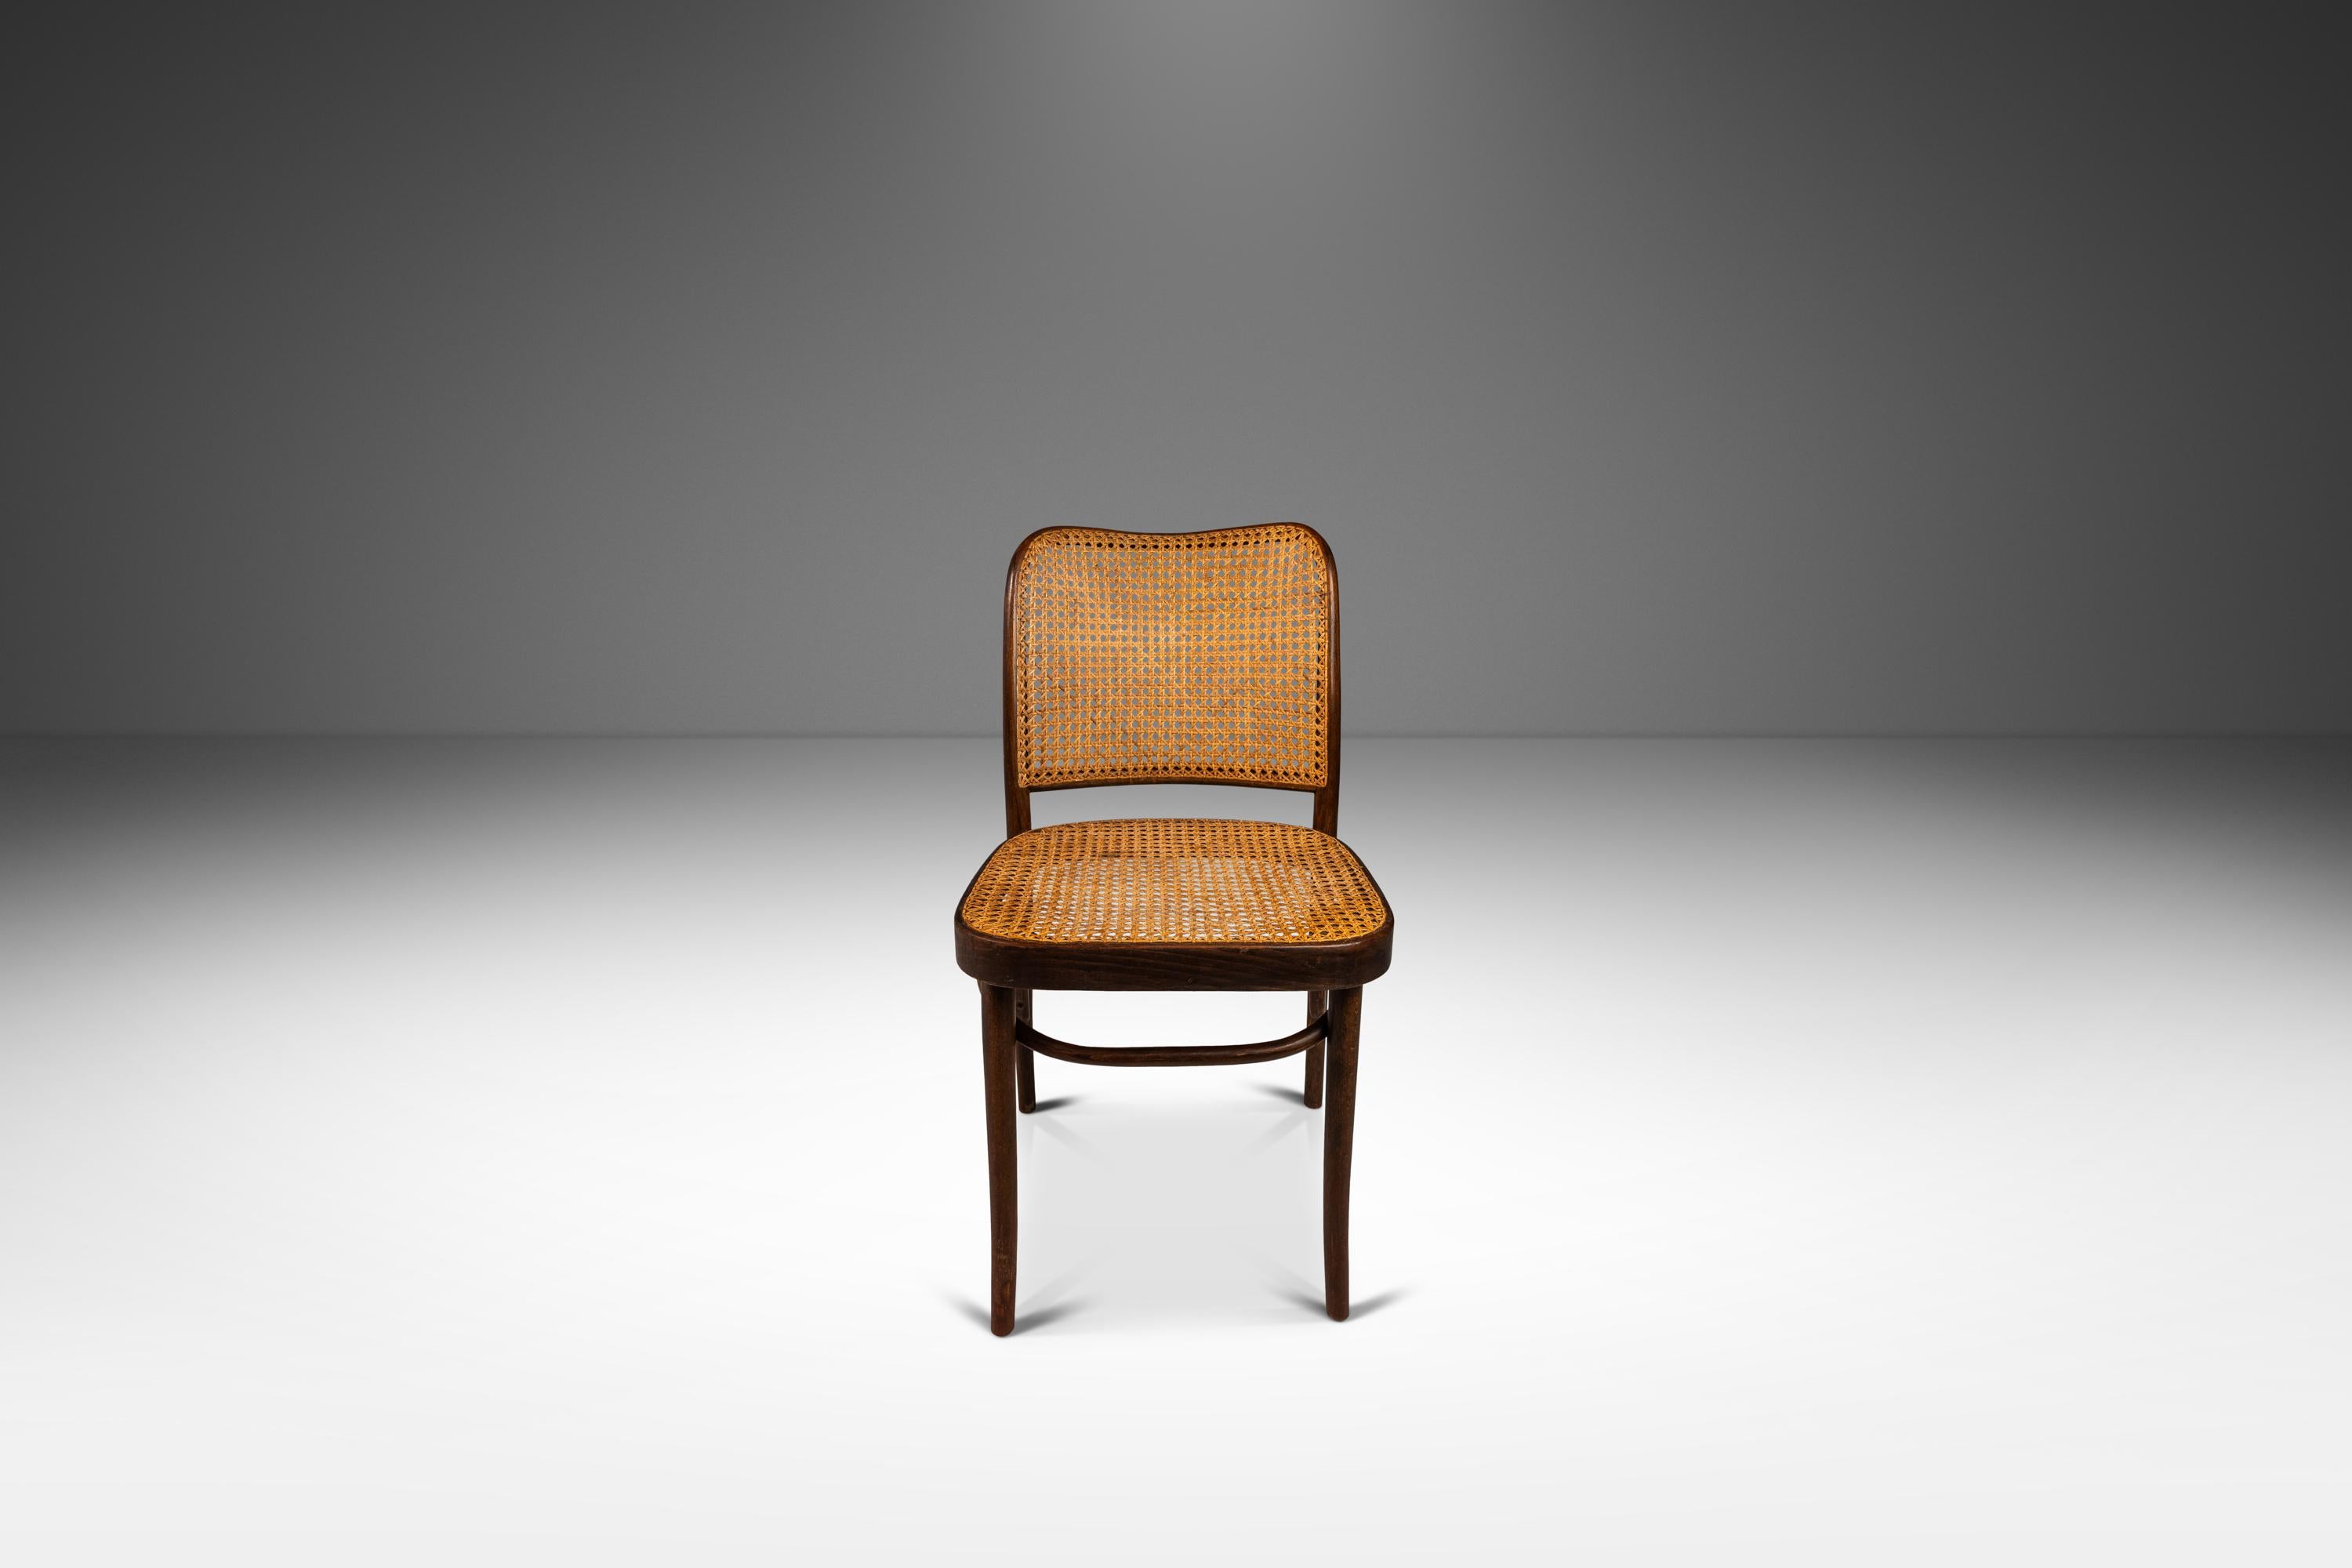 Introducing a rare and beautiful single bentwood Prague Model 811 side chair by the renowned designers Josef Frank and Josef Hoffmann for Stendig. Designed in the 1960s, this chair is a true representation of mid-century modern design and